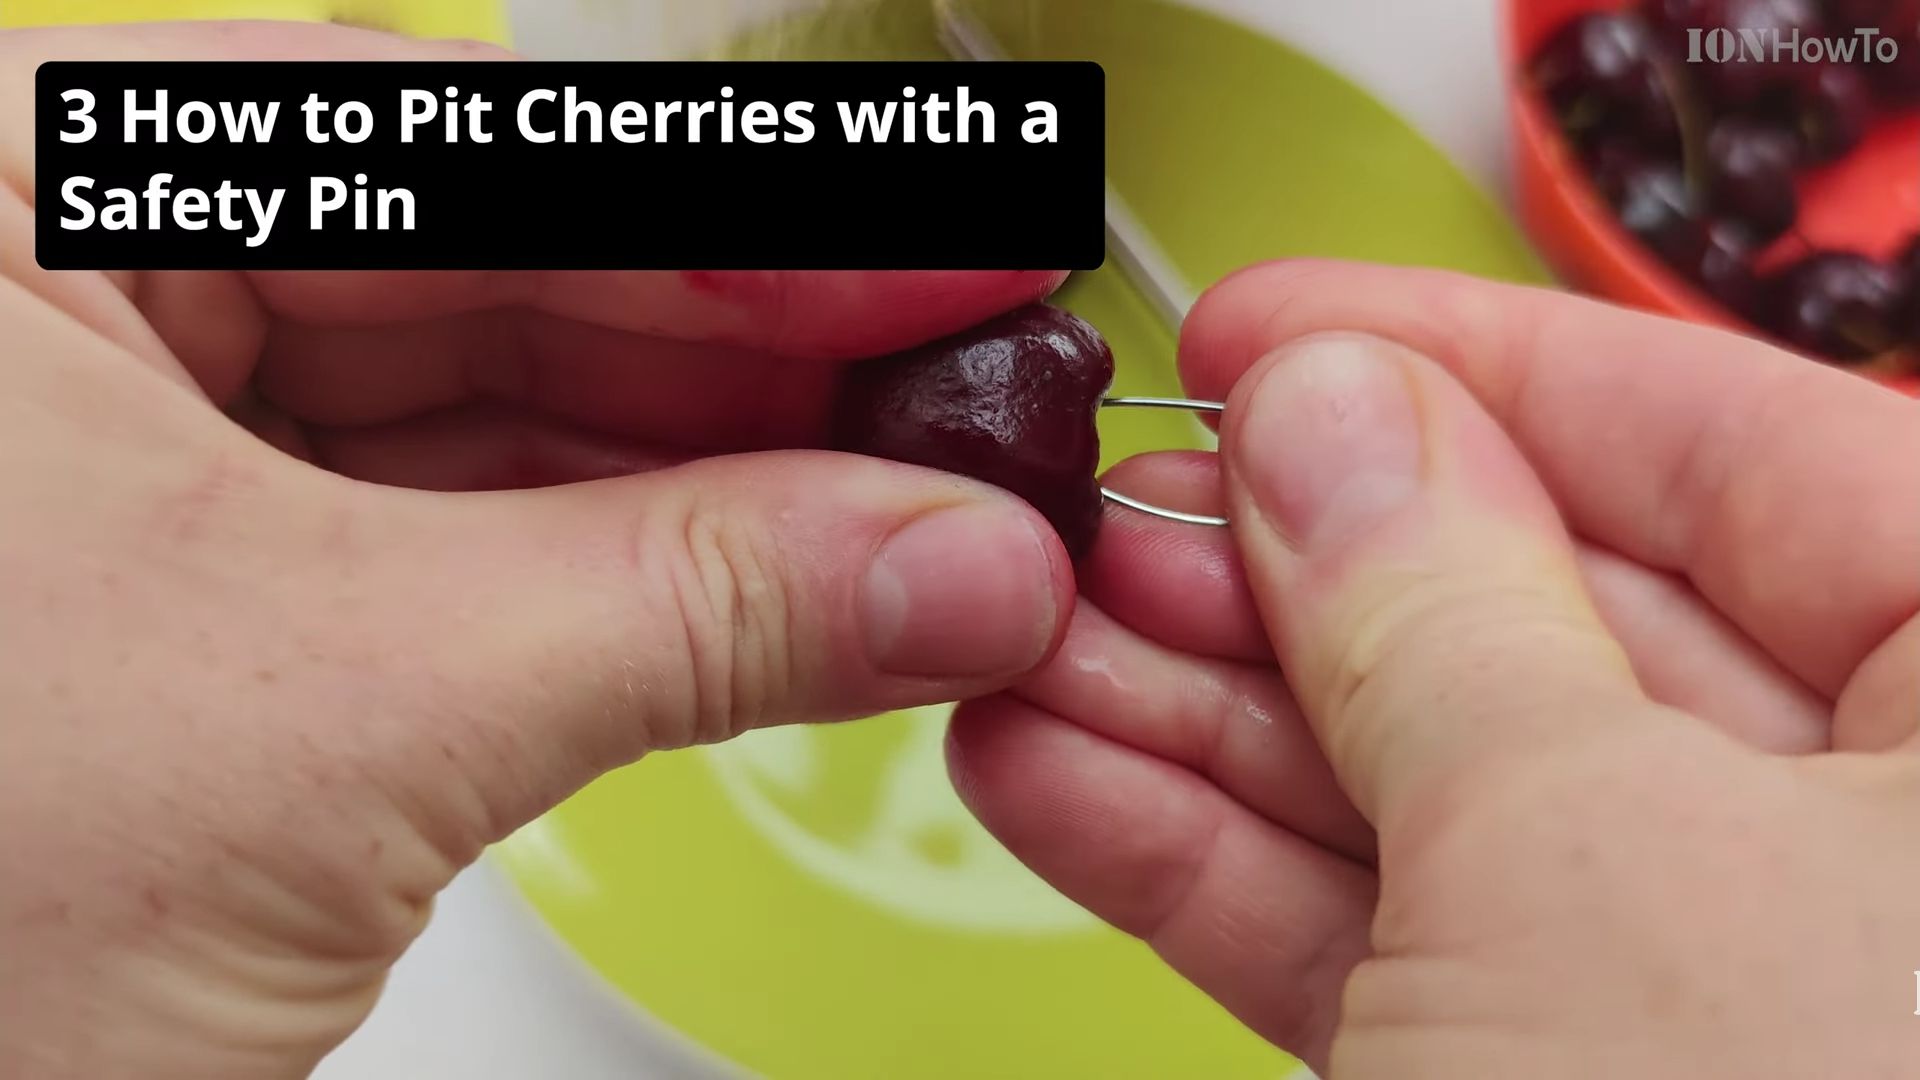 How to pit cherries with a safety pin